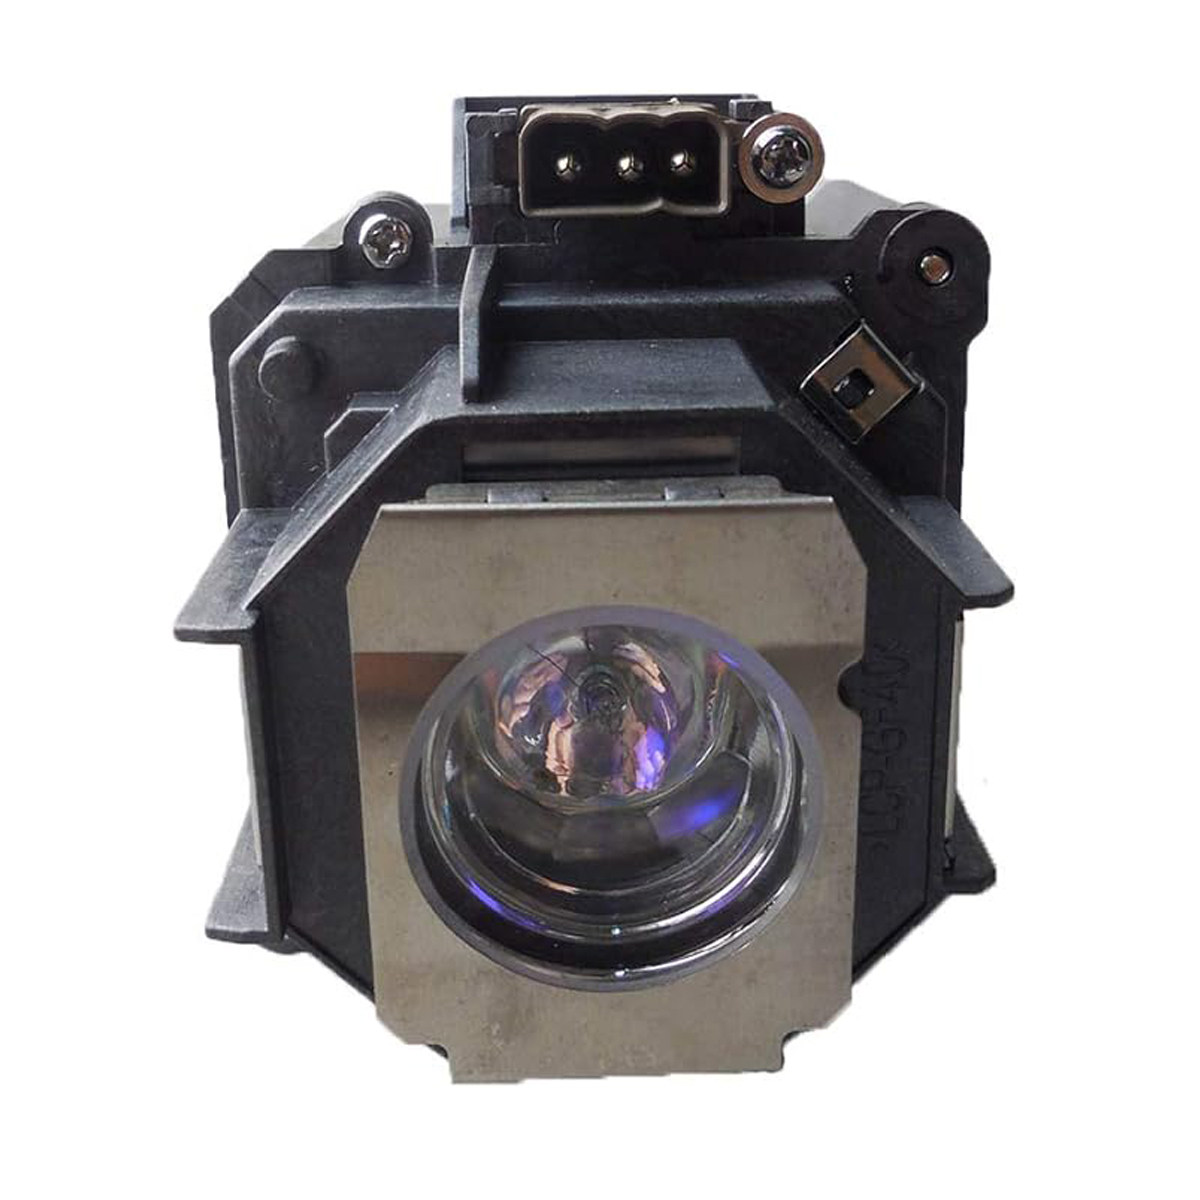 Replacement Projector lamp ELPLP46 For Epson EB-500KG EB-G5000 EB-G5200 EB-G5200'